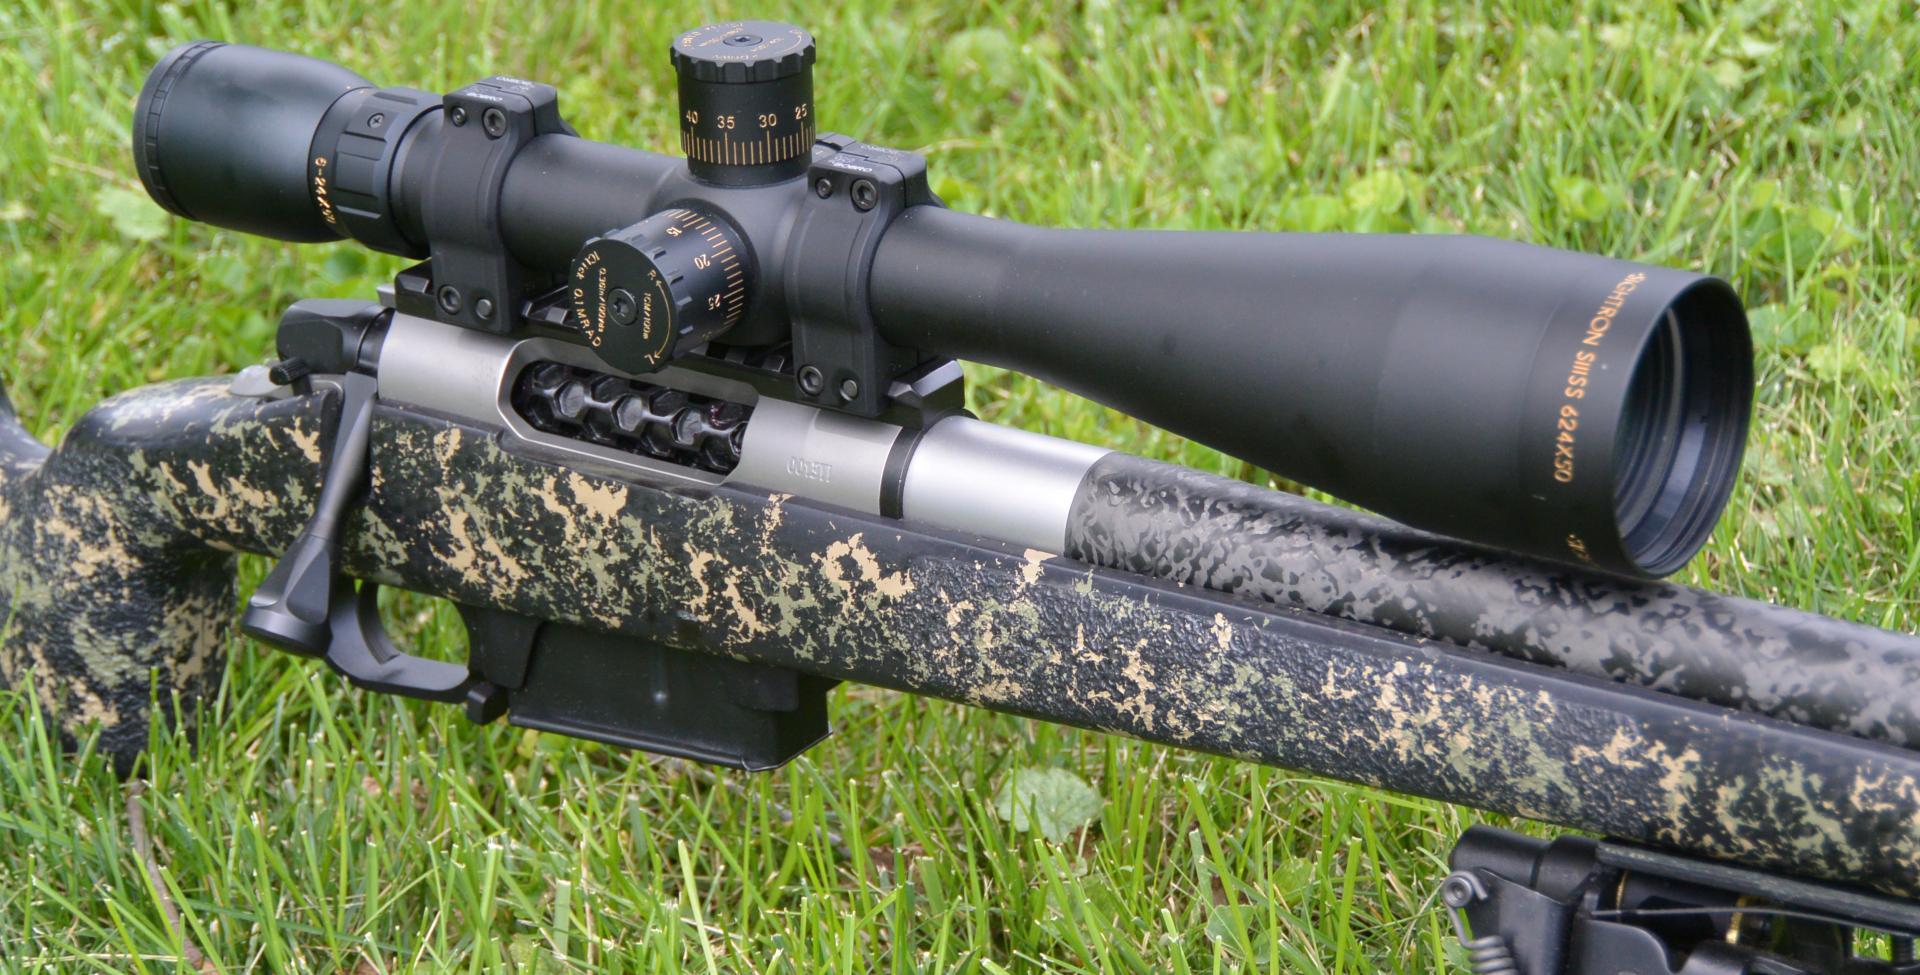 Padded Rifle Scope and Muzzle Cover – Wilde Custom Gear, Tactical Nylon